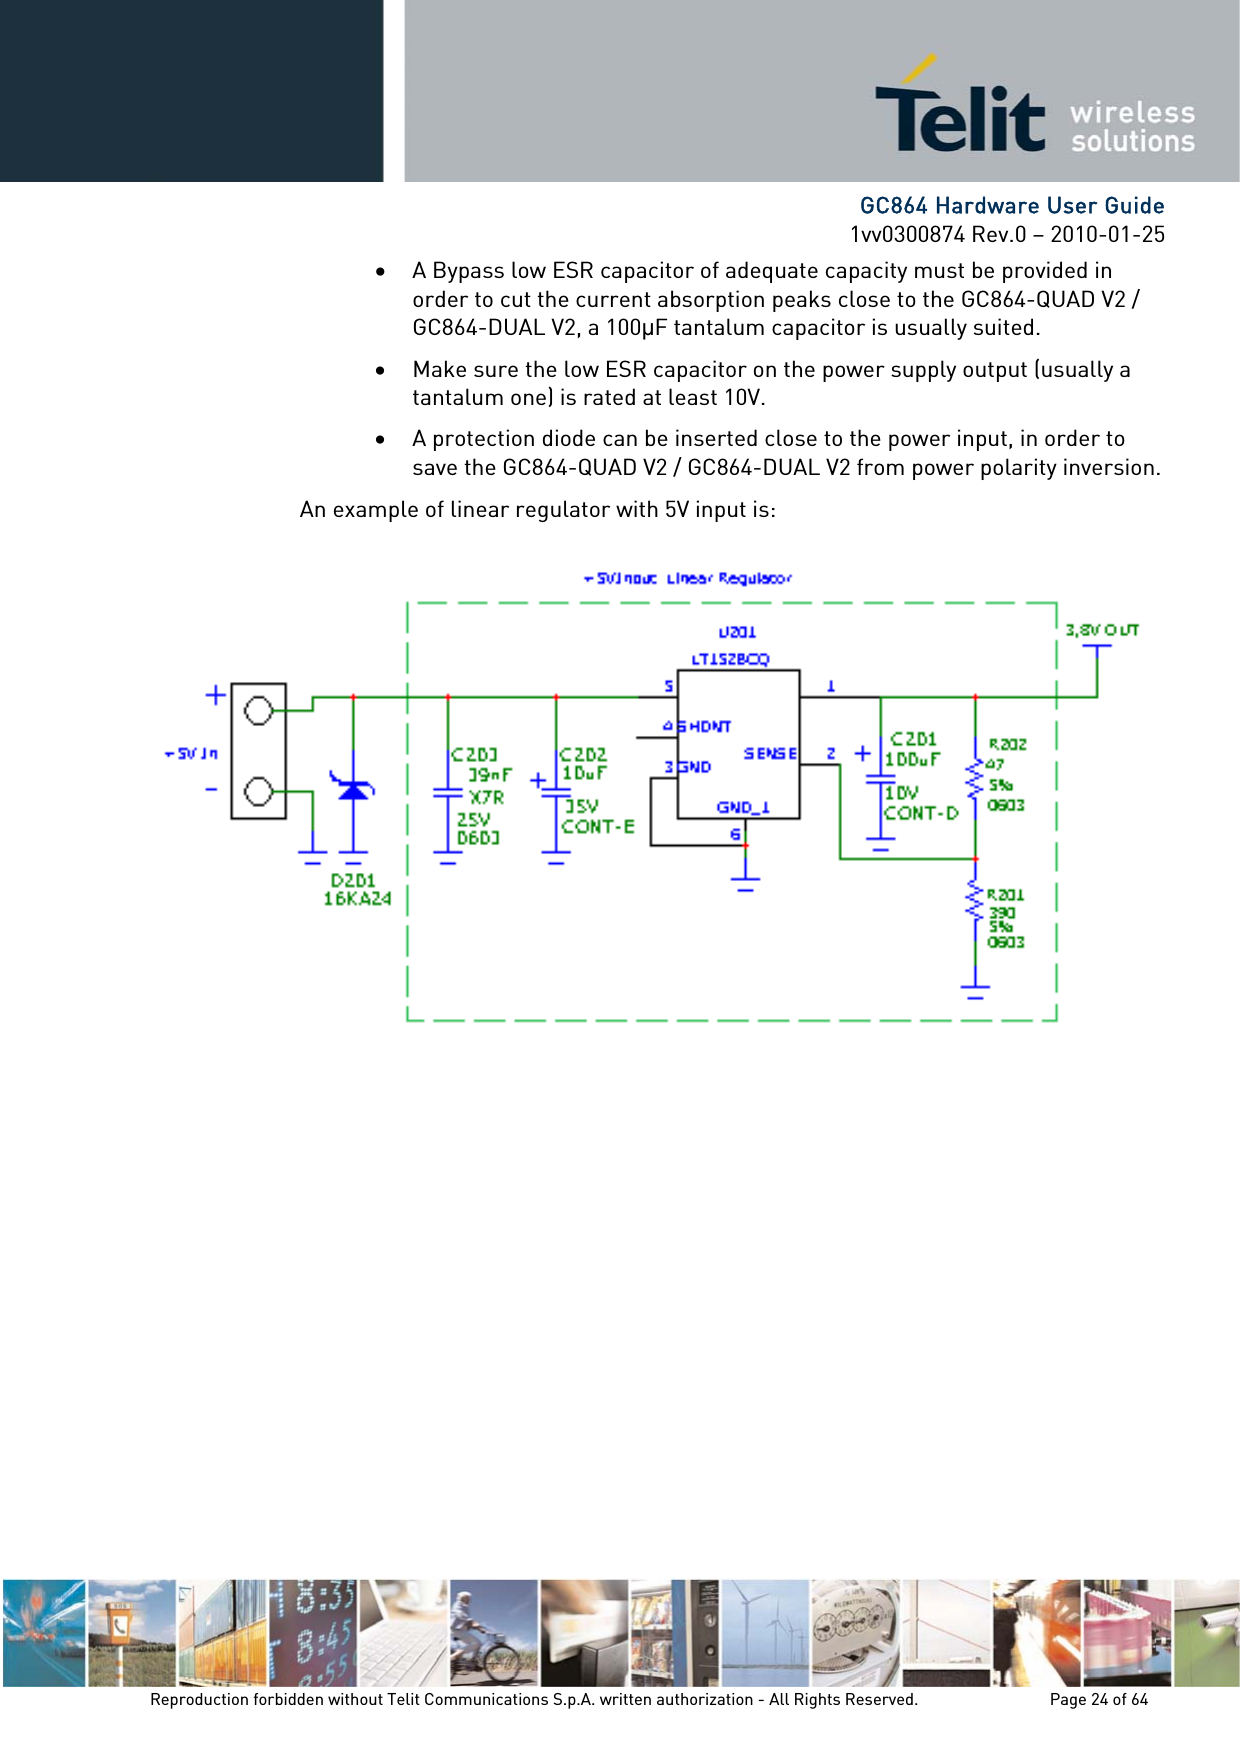      GC864 Hardware User Guide 1vv0300874 Rev.0 – 2010-01-25 Reproduction forbidden without Telit Communications S.p.A. written authorization - All Rights Reserved.    Page 24 of 64  • A Bypass low ESR capacitor of adequate capacity must be provided in order to cut the current absorption peaks close to the GC864-QUAD V2 / GC864-DUAL V2, a 100F tantalum capacitor is usually suited. • Make sure the low ESR capacitor on the power supply output (usually a tantalum one) is rated at least 10V. • A protection diode can be inserted close to the power input, in order to save the GC864-QUAD V2 / GC864-DUAL V2 from power polarity inversion. An example of linear regulator with 5V input is:  